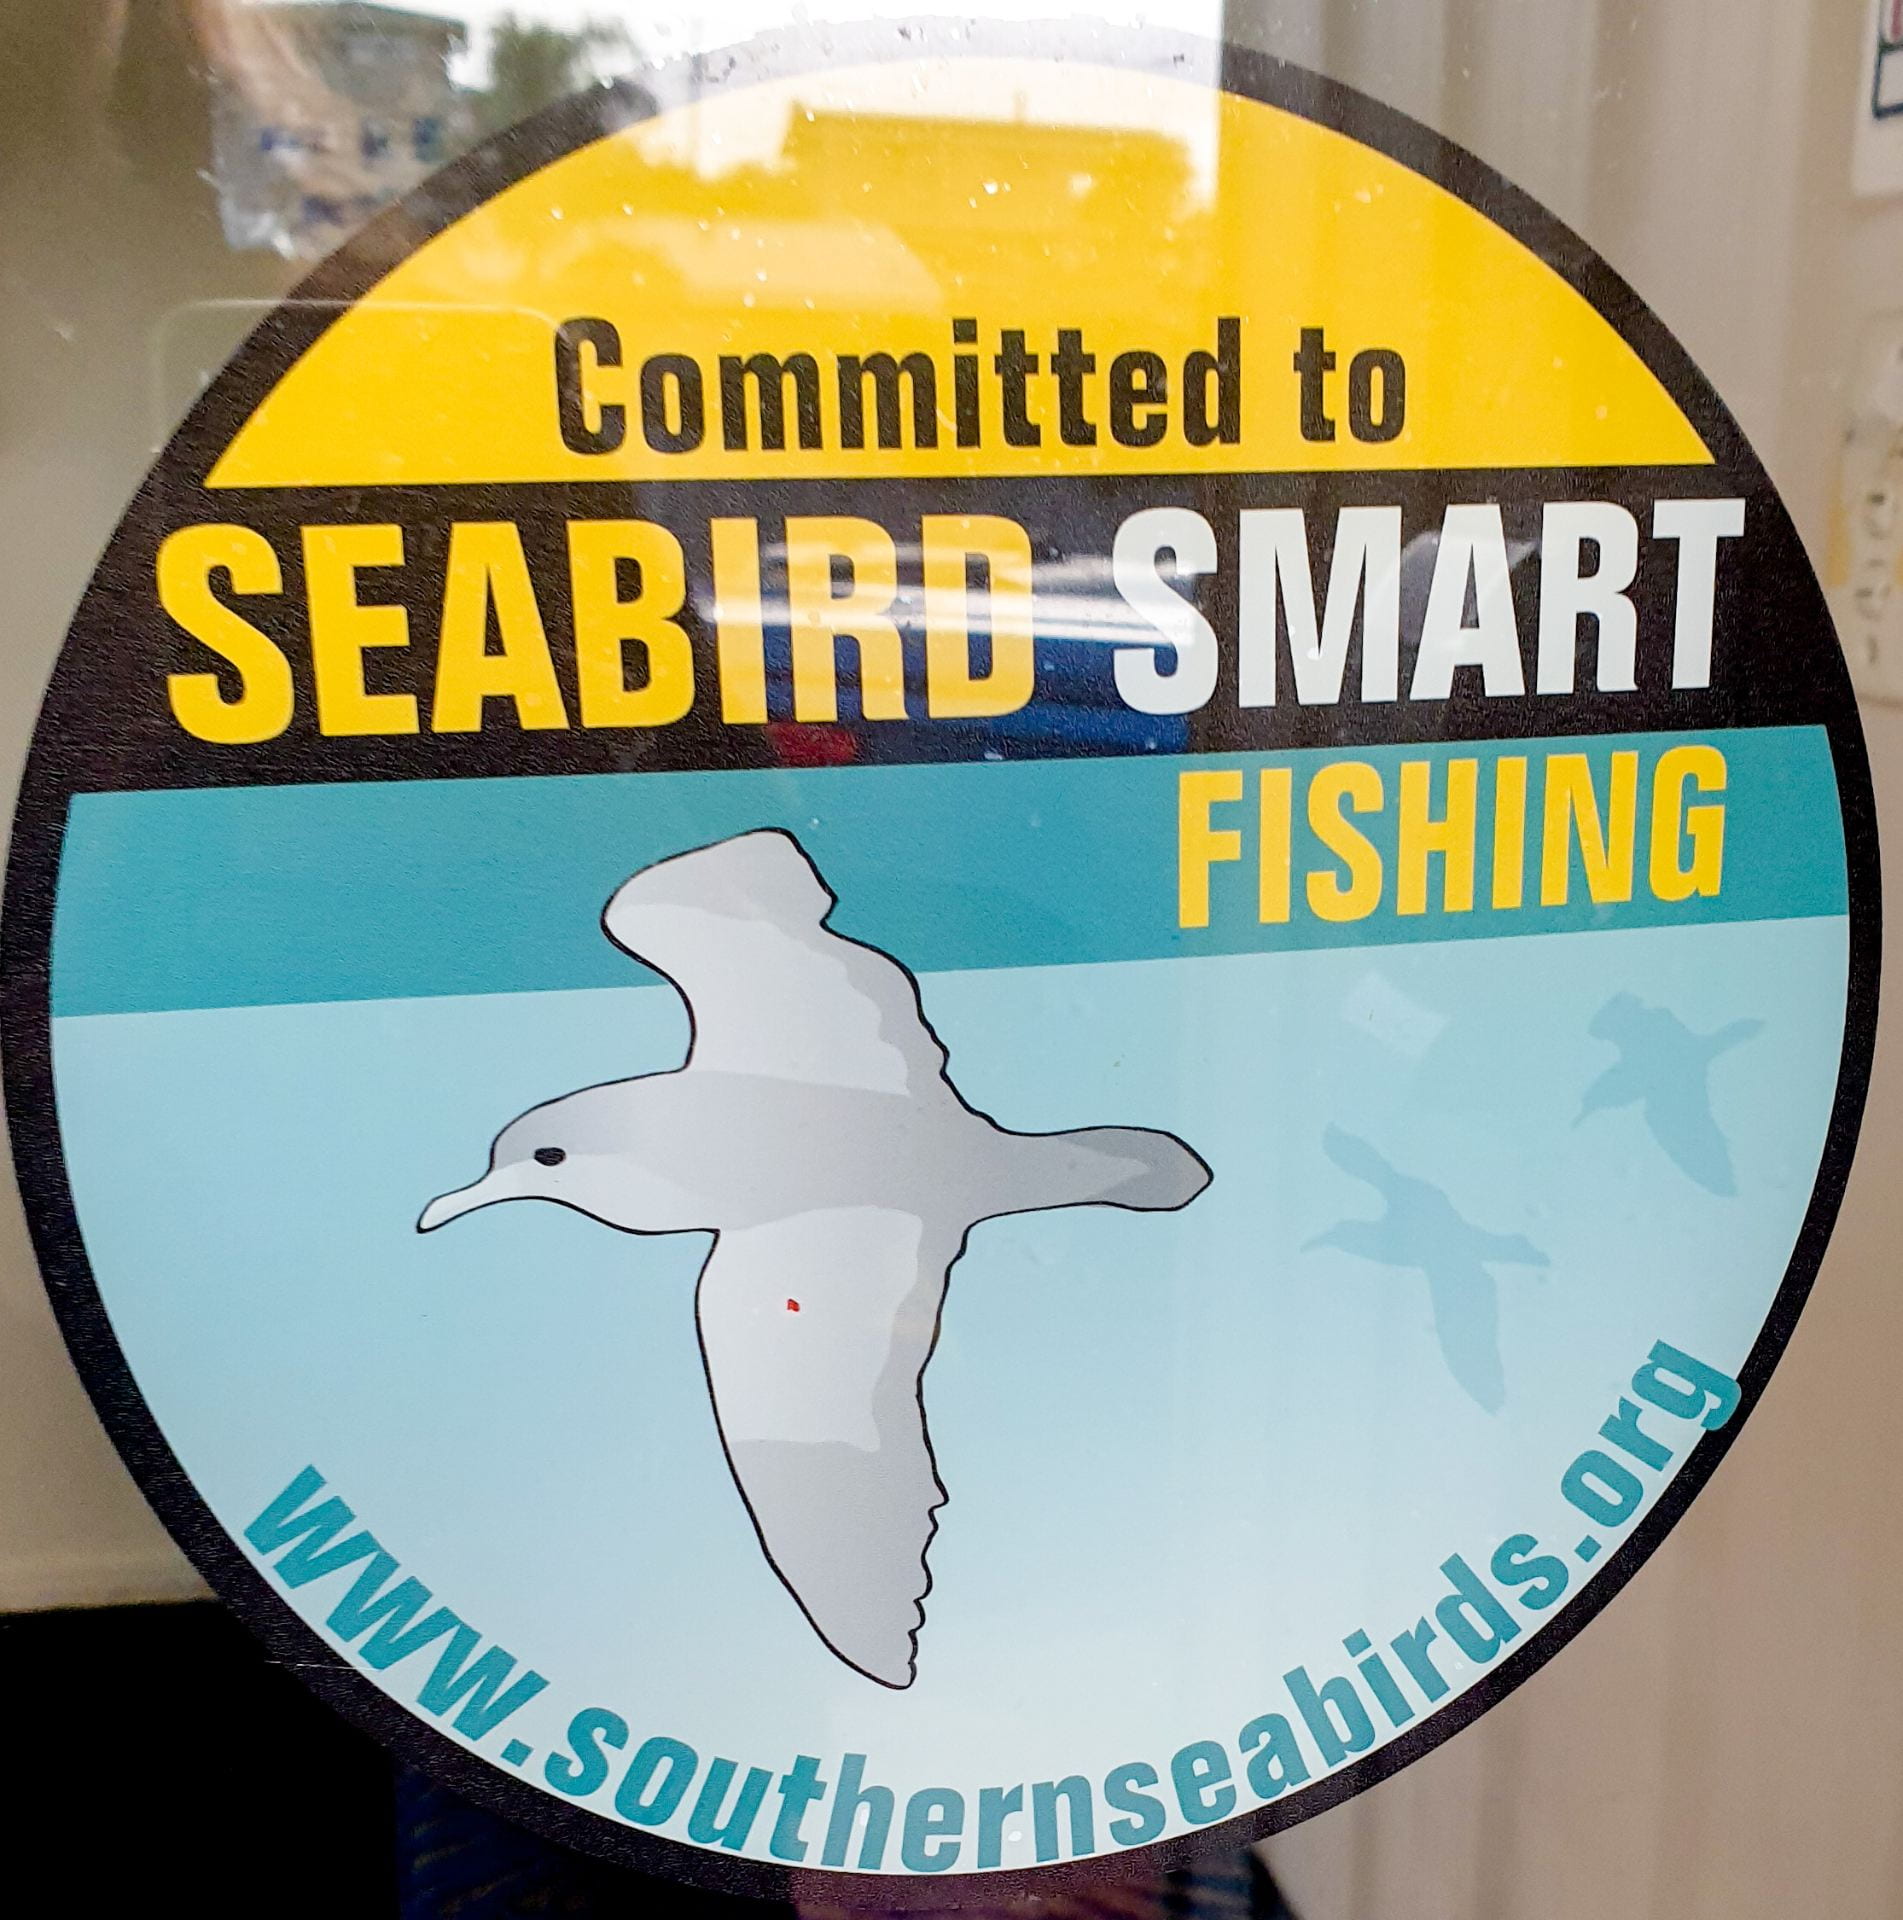 A circular sticker attached to a window with an image of a flying seabird and the words 'Committed to seabird smart fishing www.southernseabirds.org"